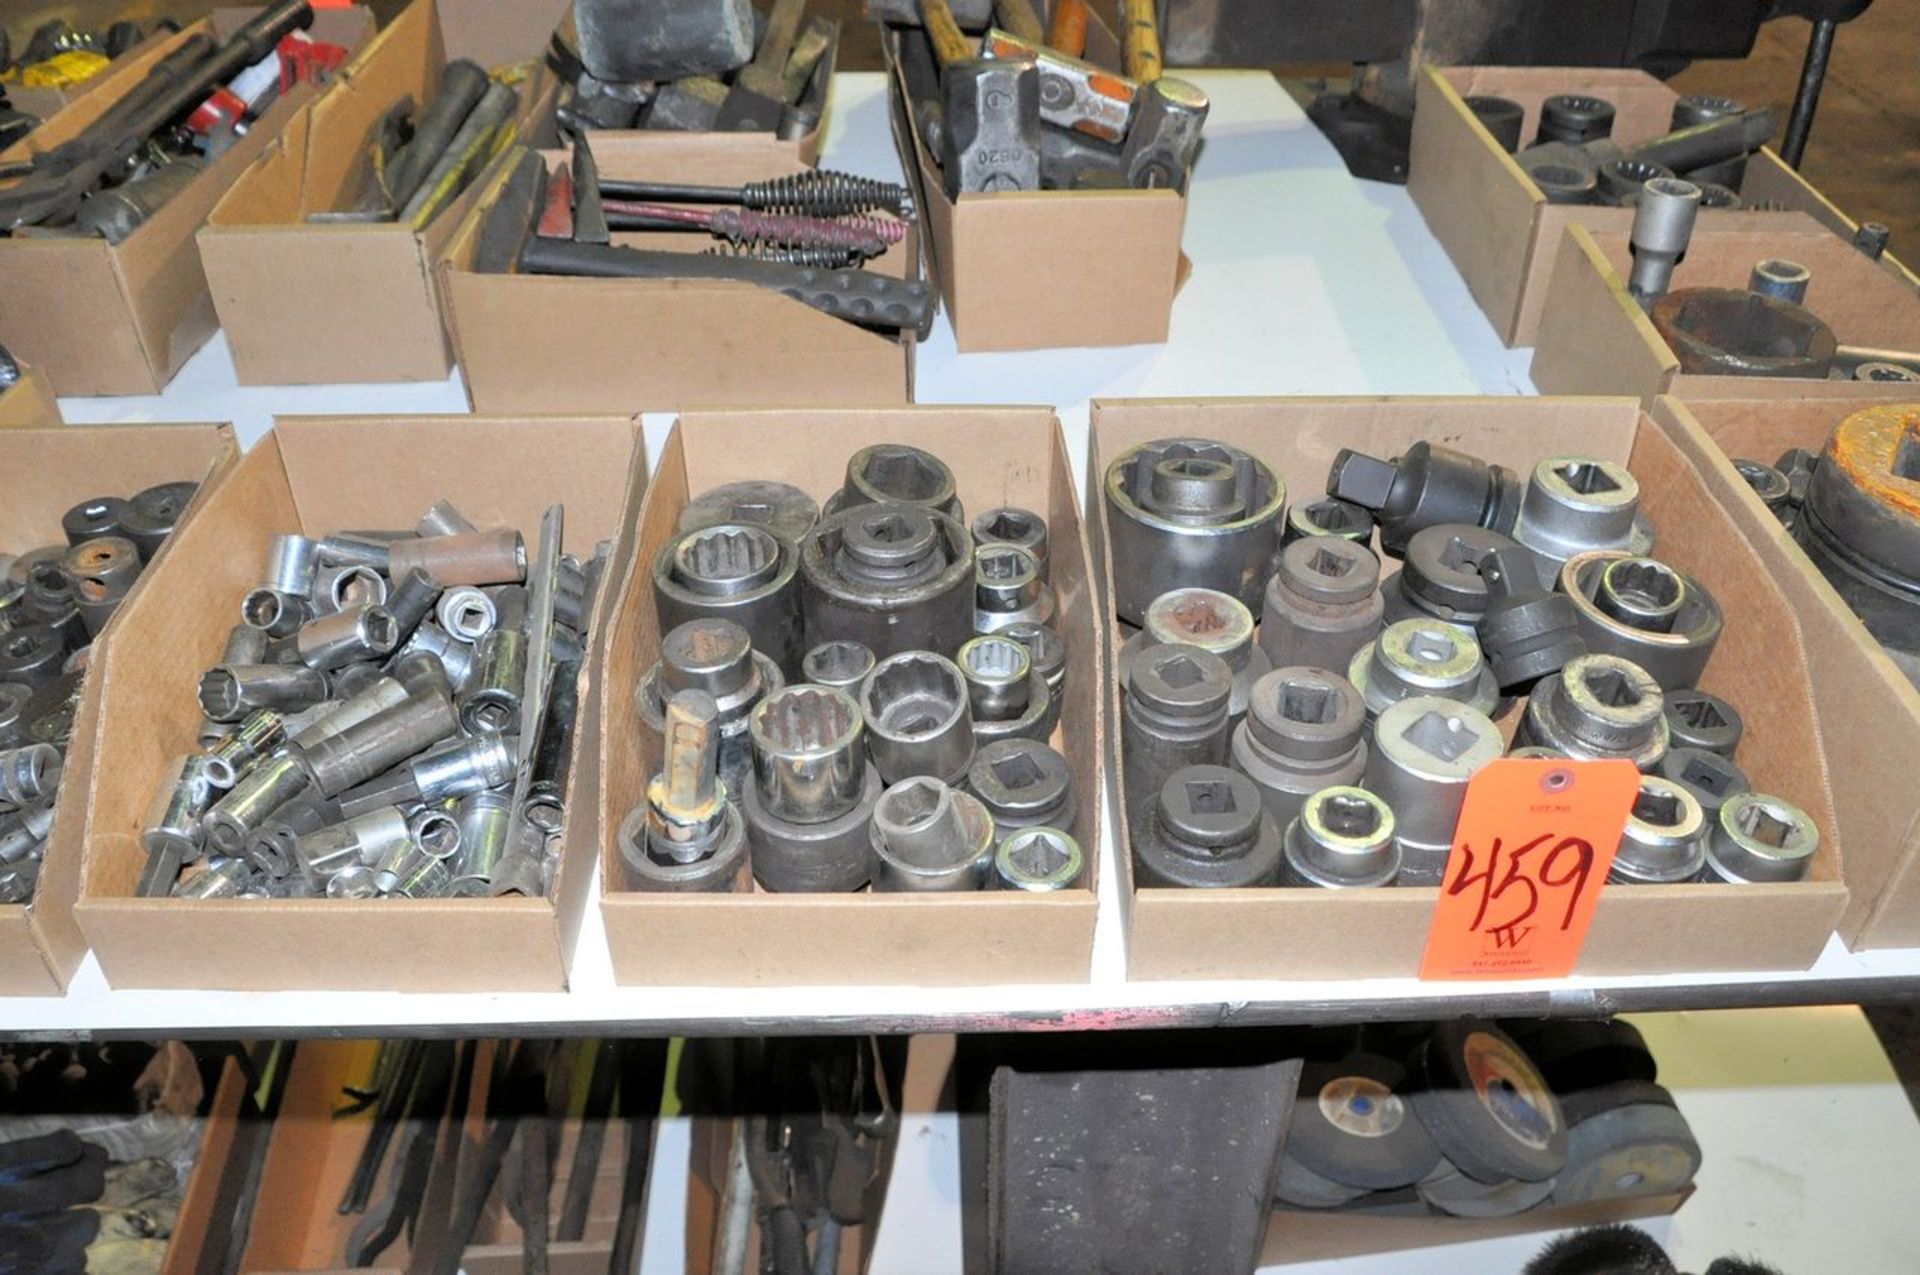 Lot - 3/4", 1/2", 3/8" and 1/4" Drive Sockets and Ratchets in (5) Boxes, (Machine Shop)